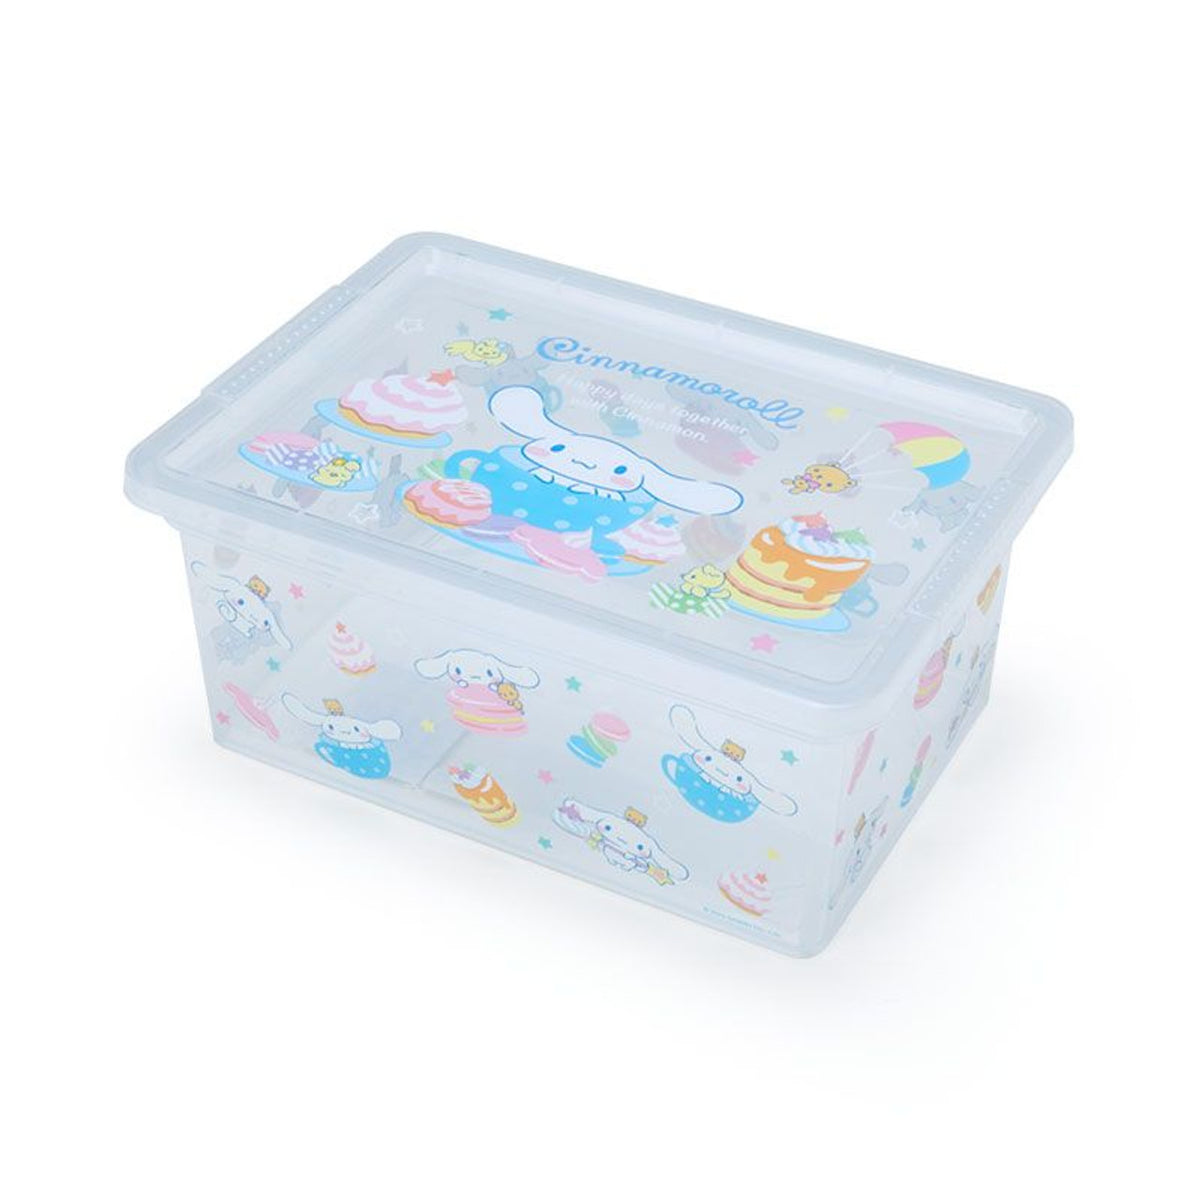 Plastic storage containers - household items - by owner